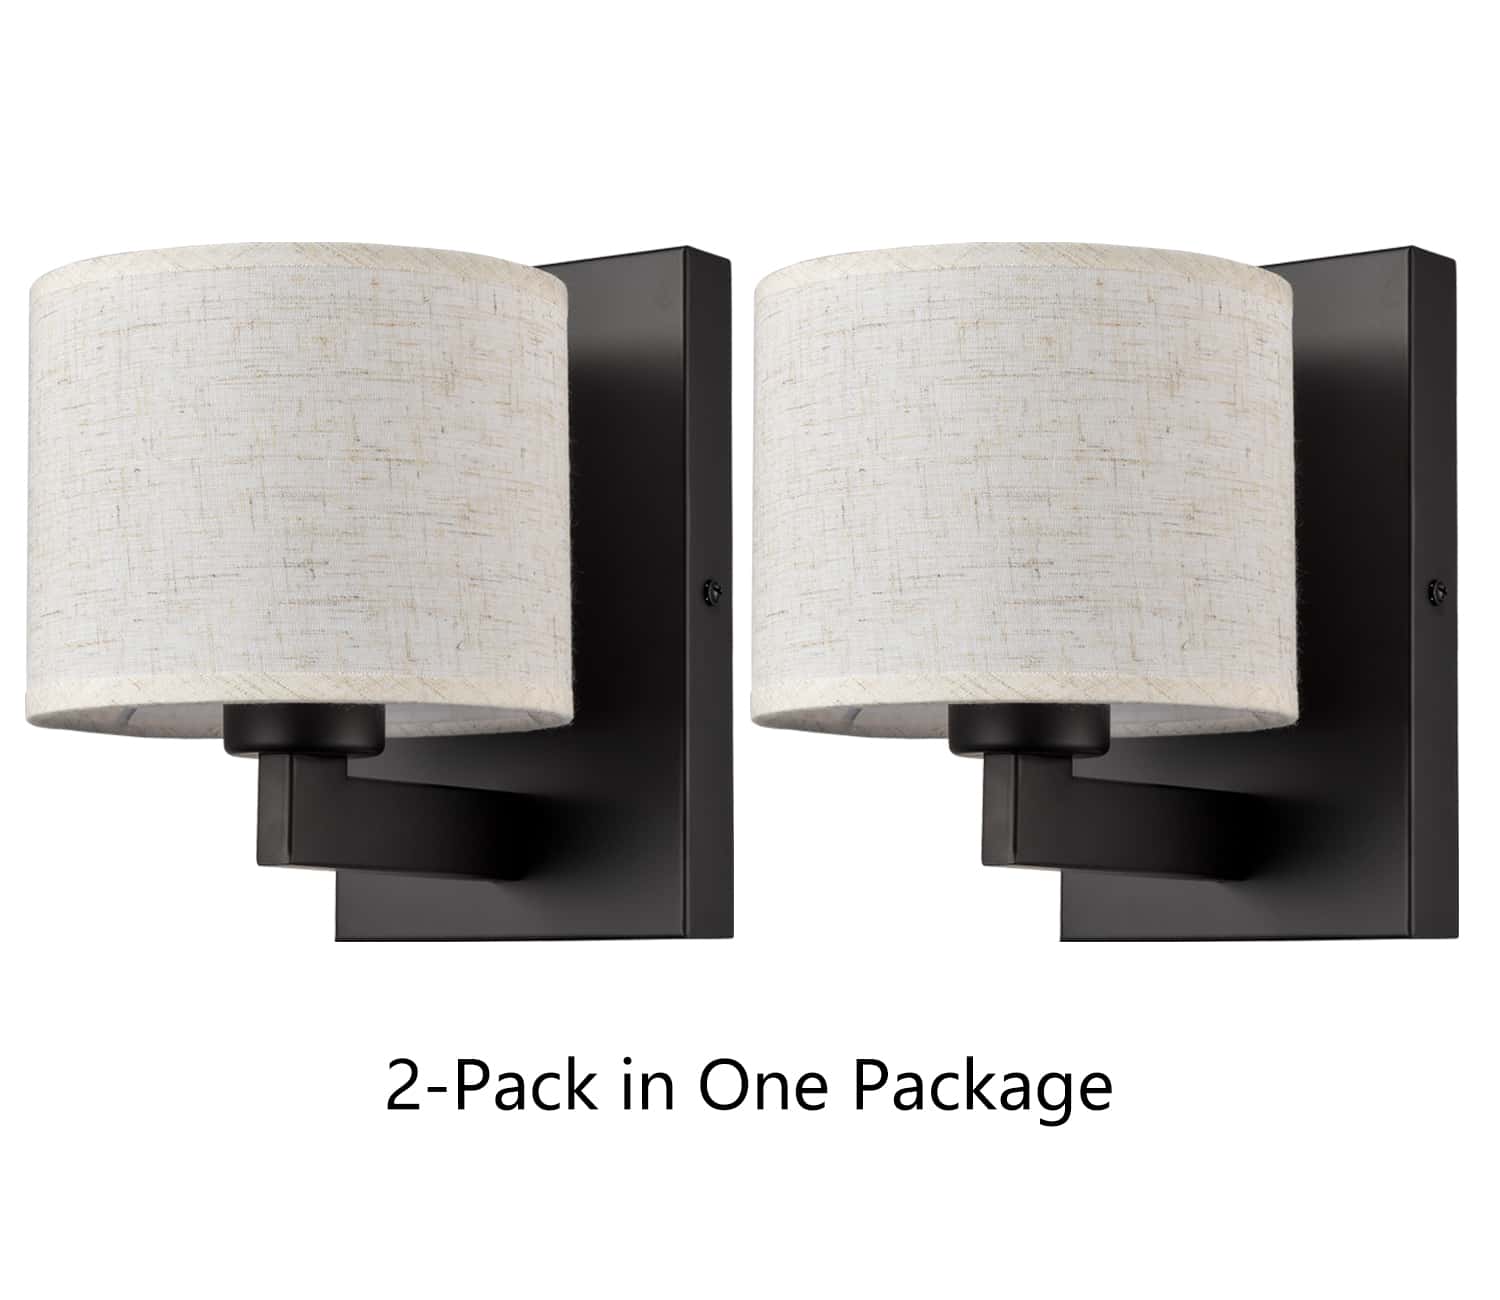 Black Wall Sconce Set of 2 Modern Fabric Shade Wall Lamps Bedroom